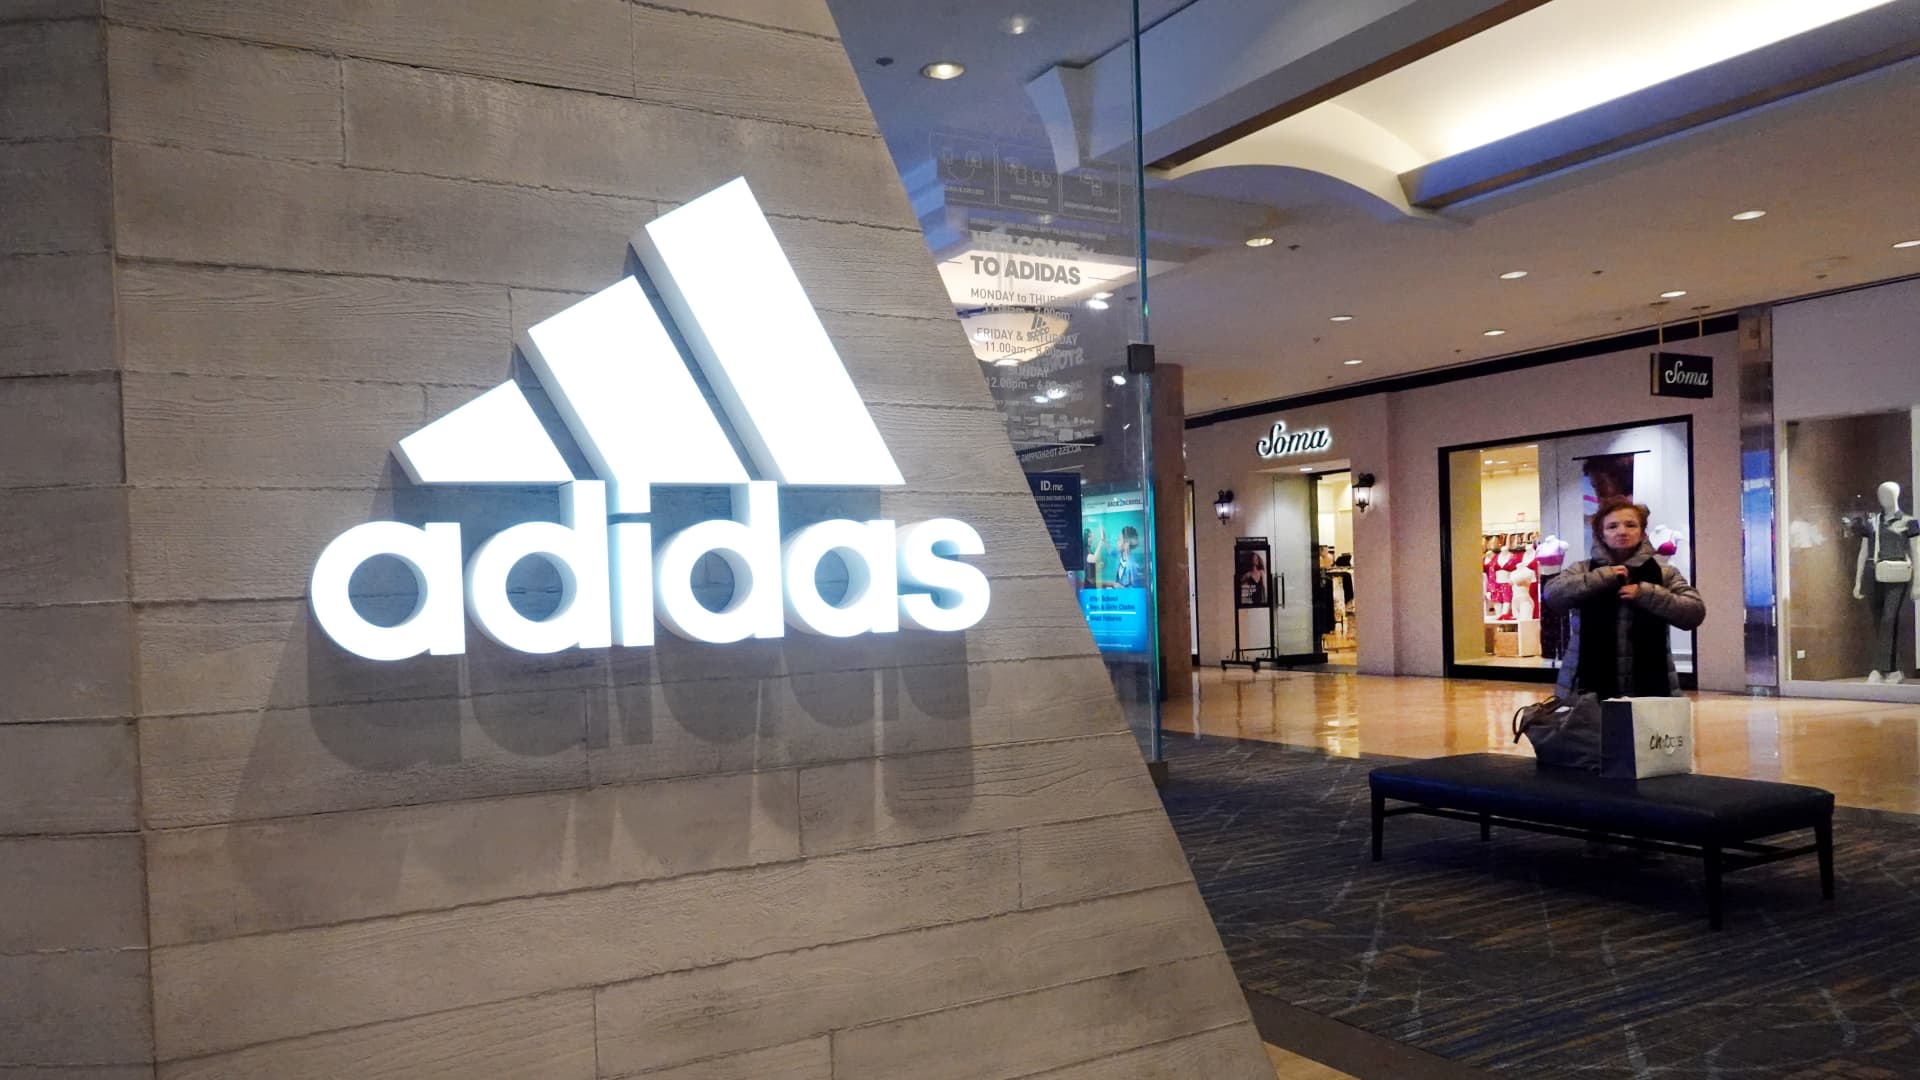 Adidas CEO says Kanye West didn’t mean antisemitic remarks, isn’t a bad person